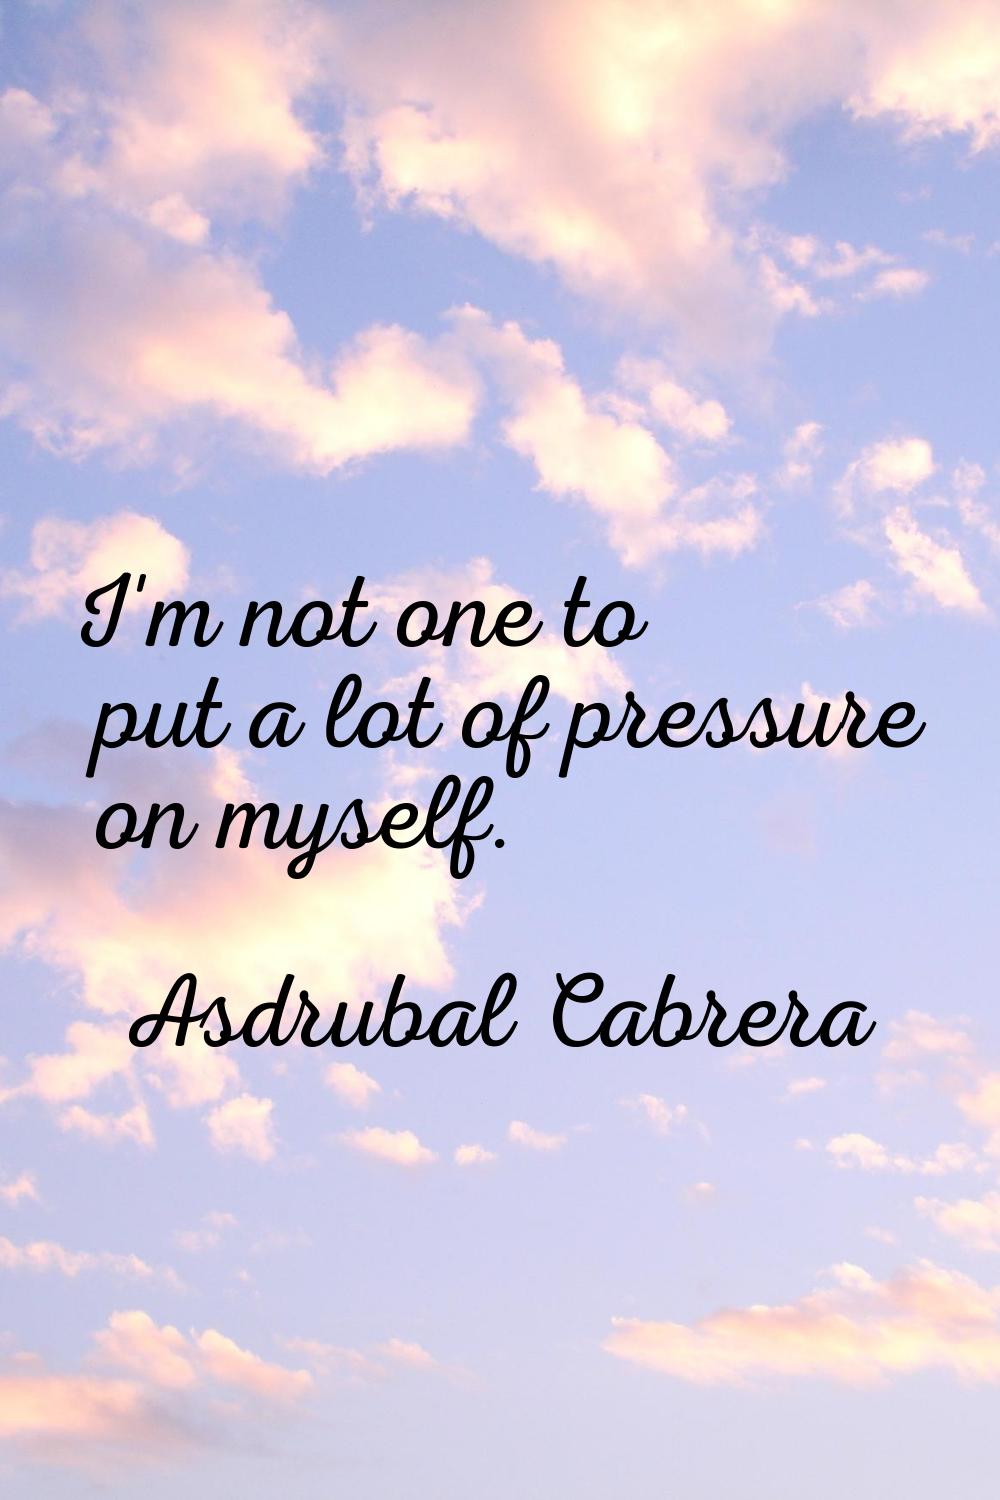 I'm not one to put a lot of pressure on myself.